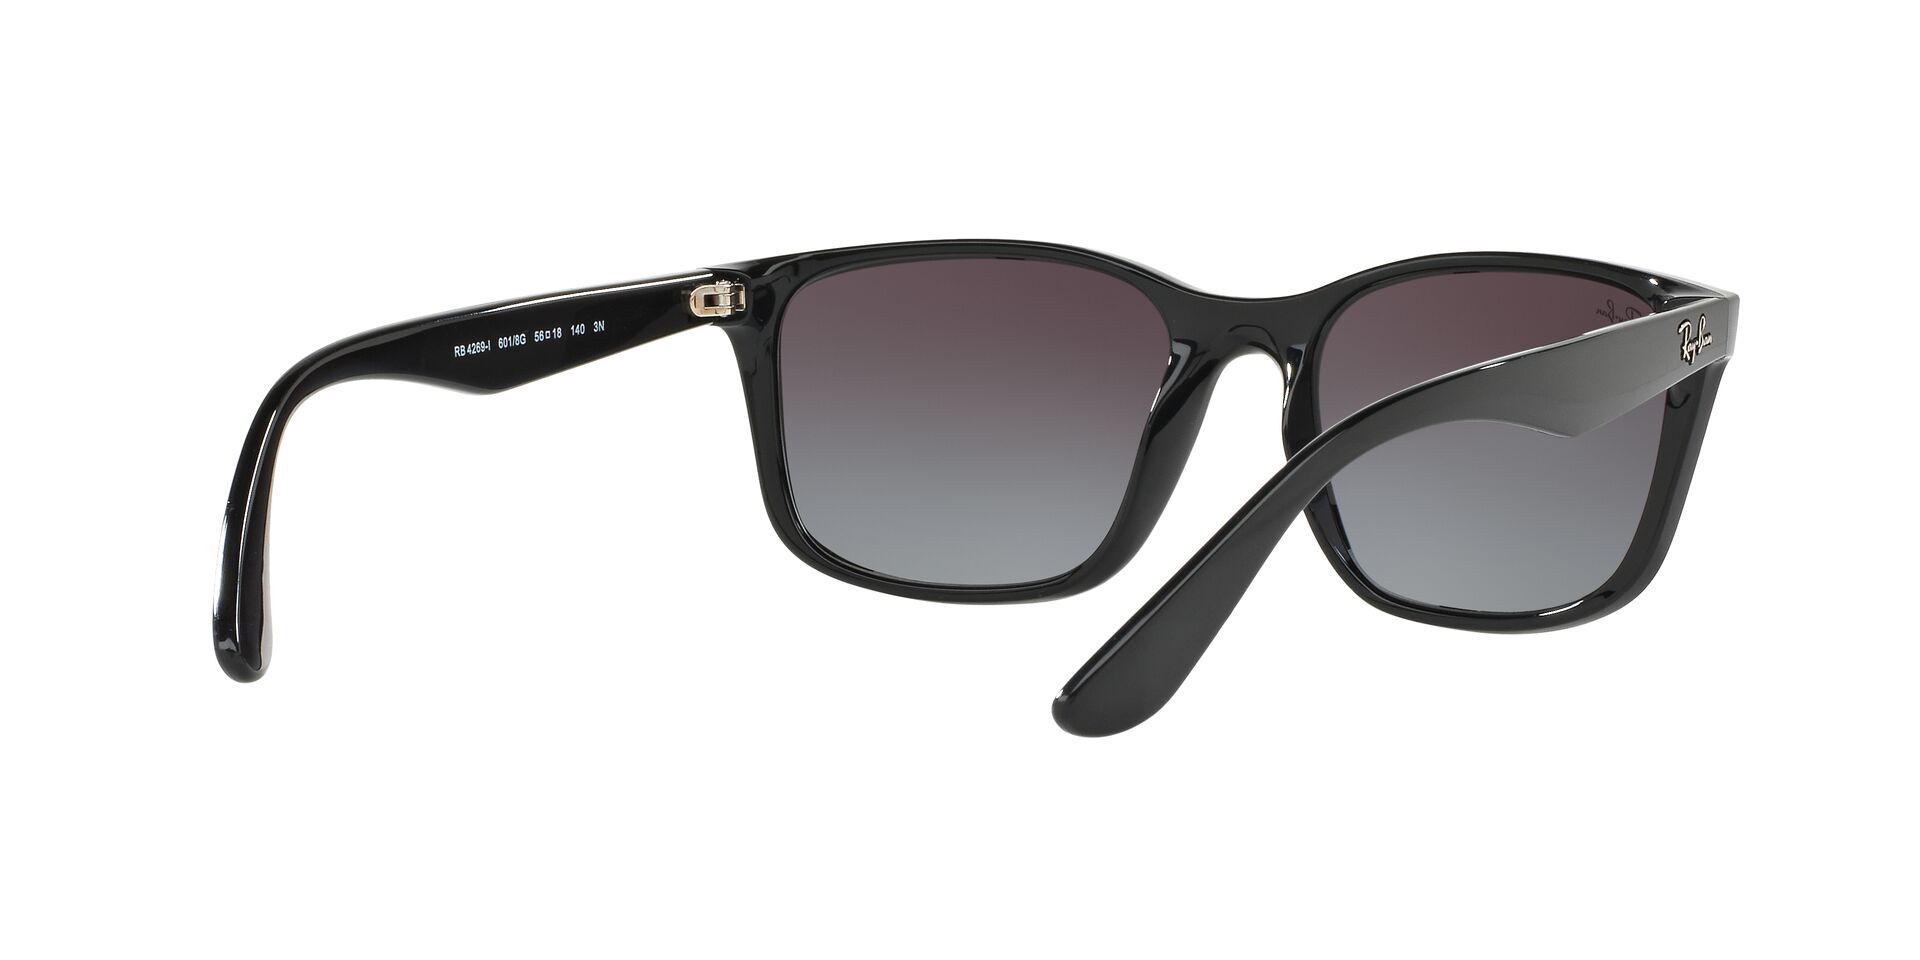 Buy Ray-Ban Rb4269 Sunglasses Online.